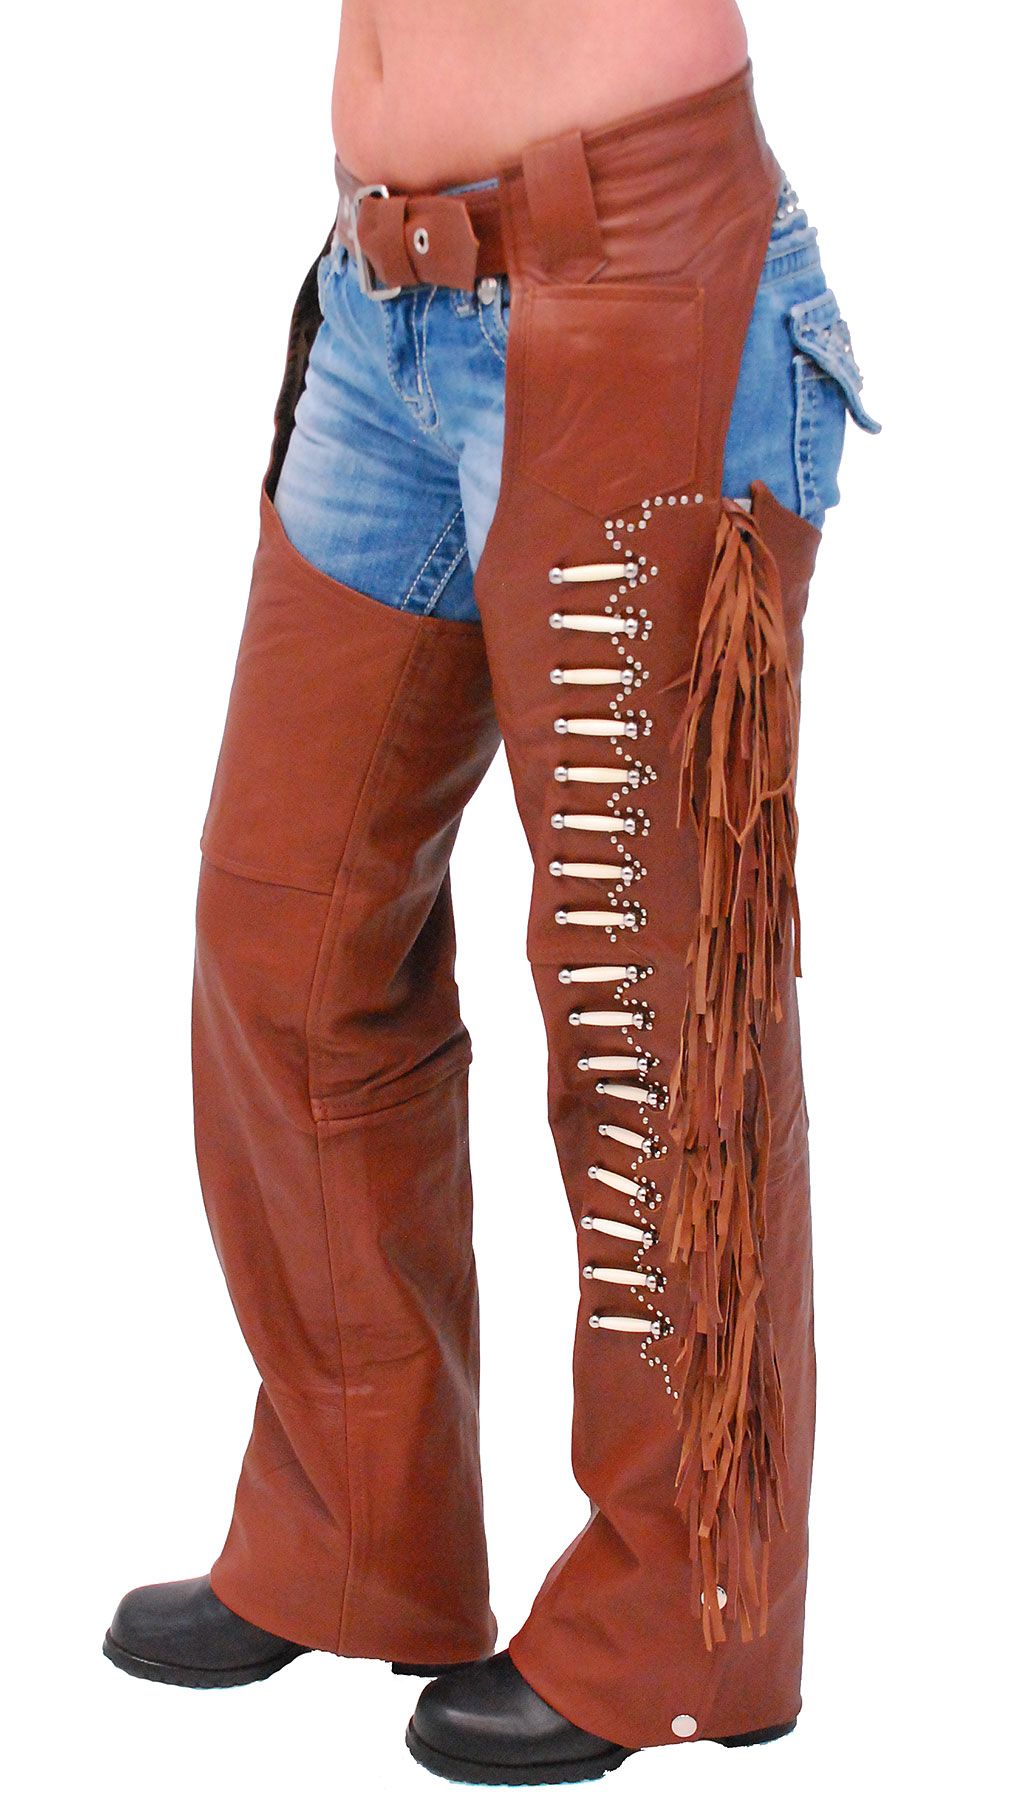 Western chaps in brown (terracotta brown) with genuine bone beading, rivet studding accents, 6" fringe, YKK zippers, snap down leg cuffs, a small hip pocket and a soft nylon lining.